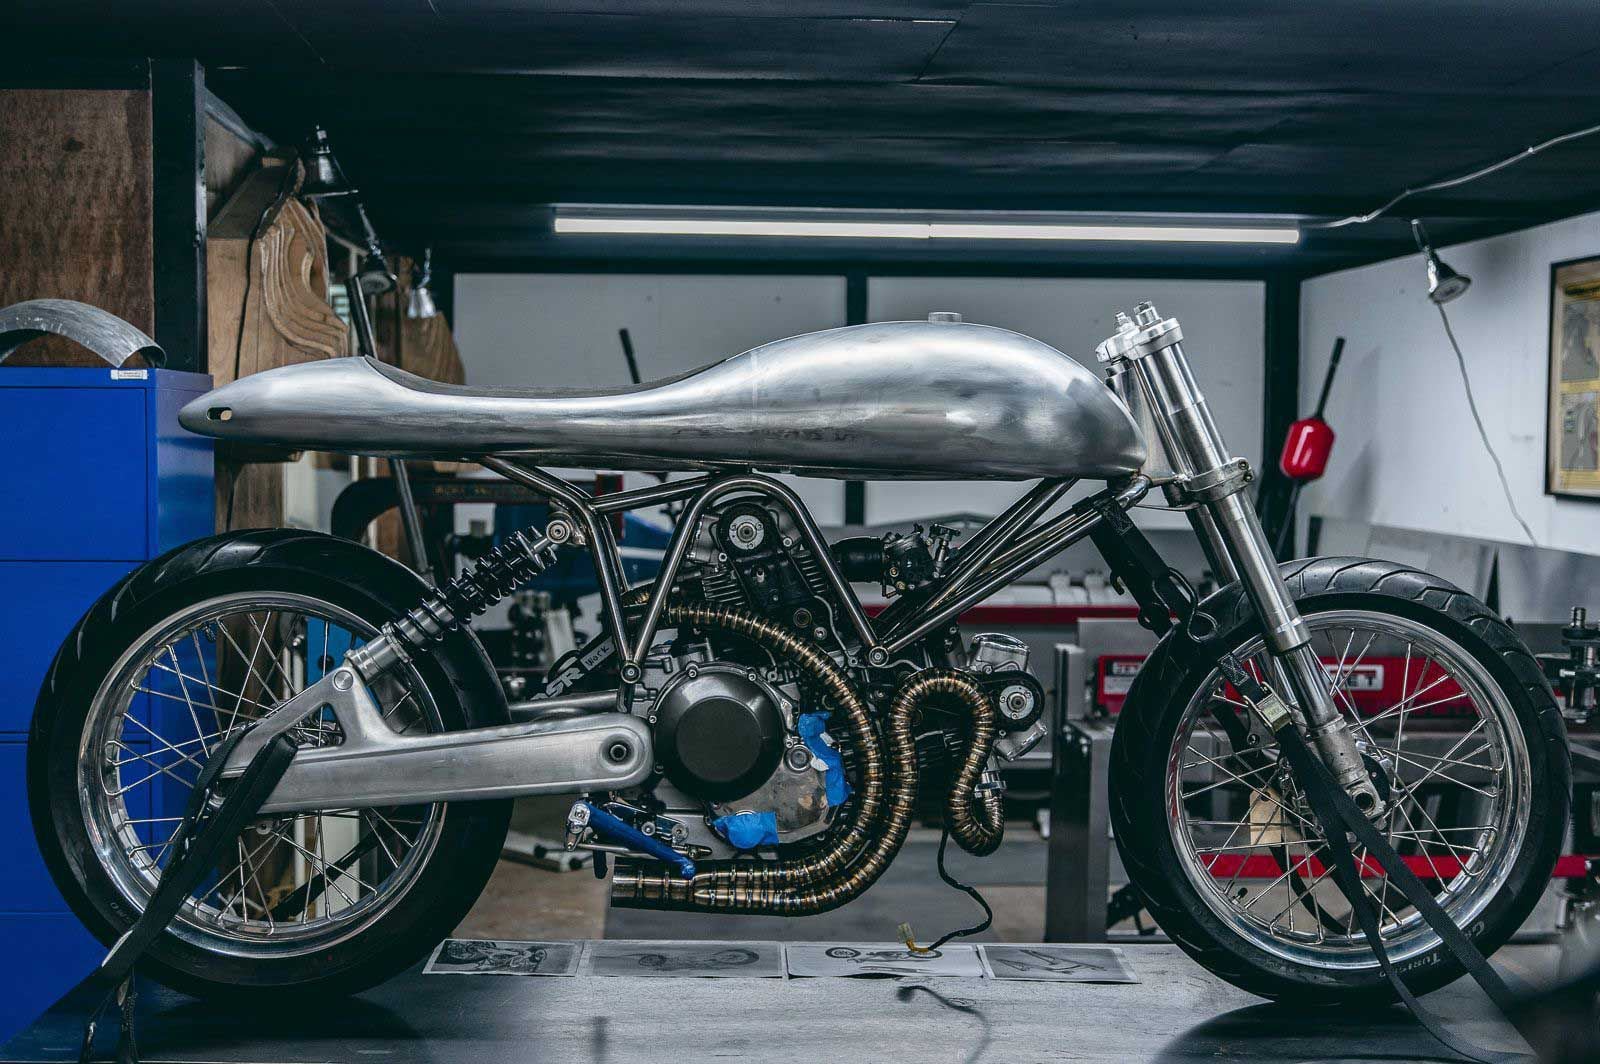 Revivals Cycles’ “The Fuse,” a custom that uses a Ducati 1100 air-cooled engine, will make its public debut in 2022.